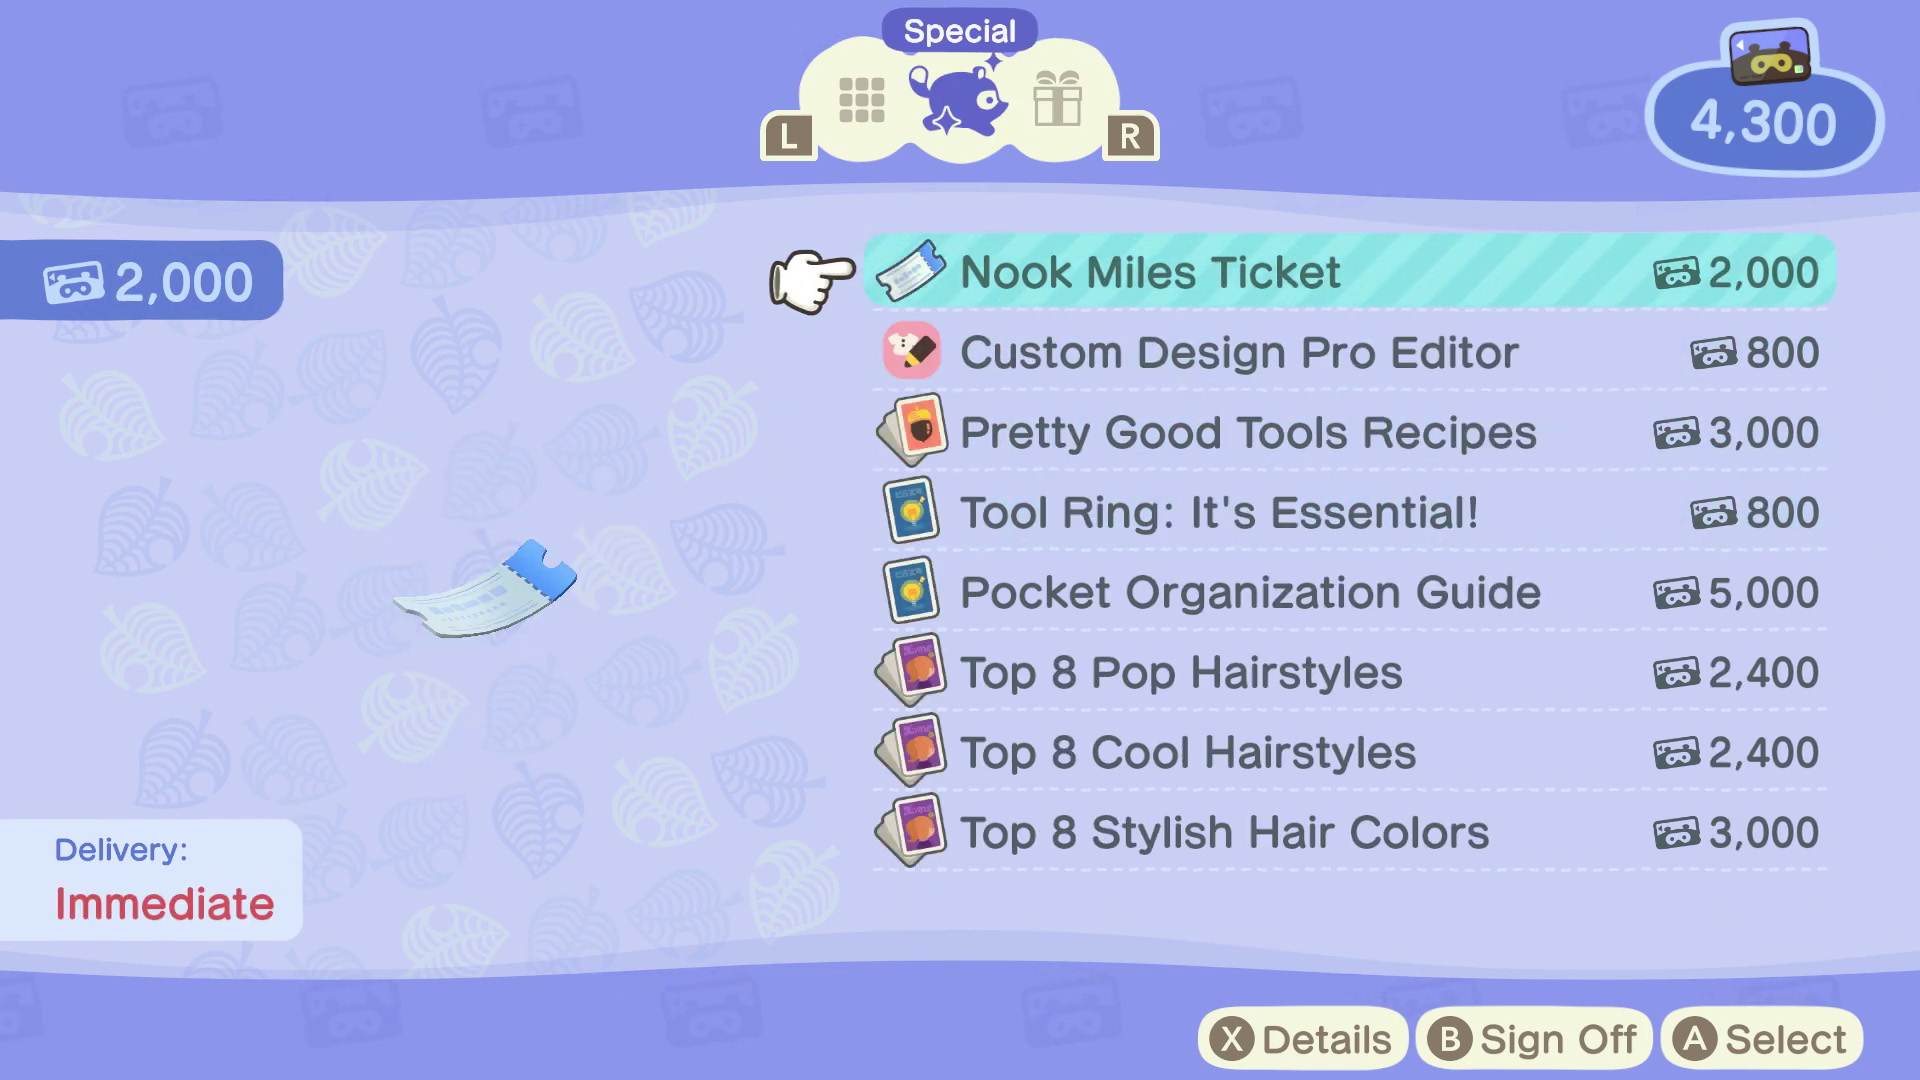 How To Get Iron Nuggets For Crafting Tools Nook S Cranny In Animal Crossing New Horizons - roblox islands item value list